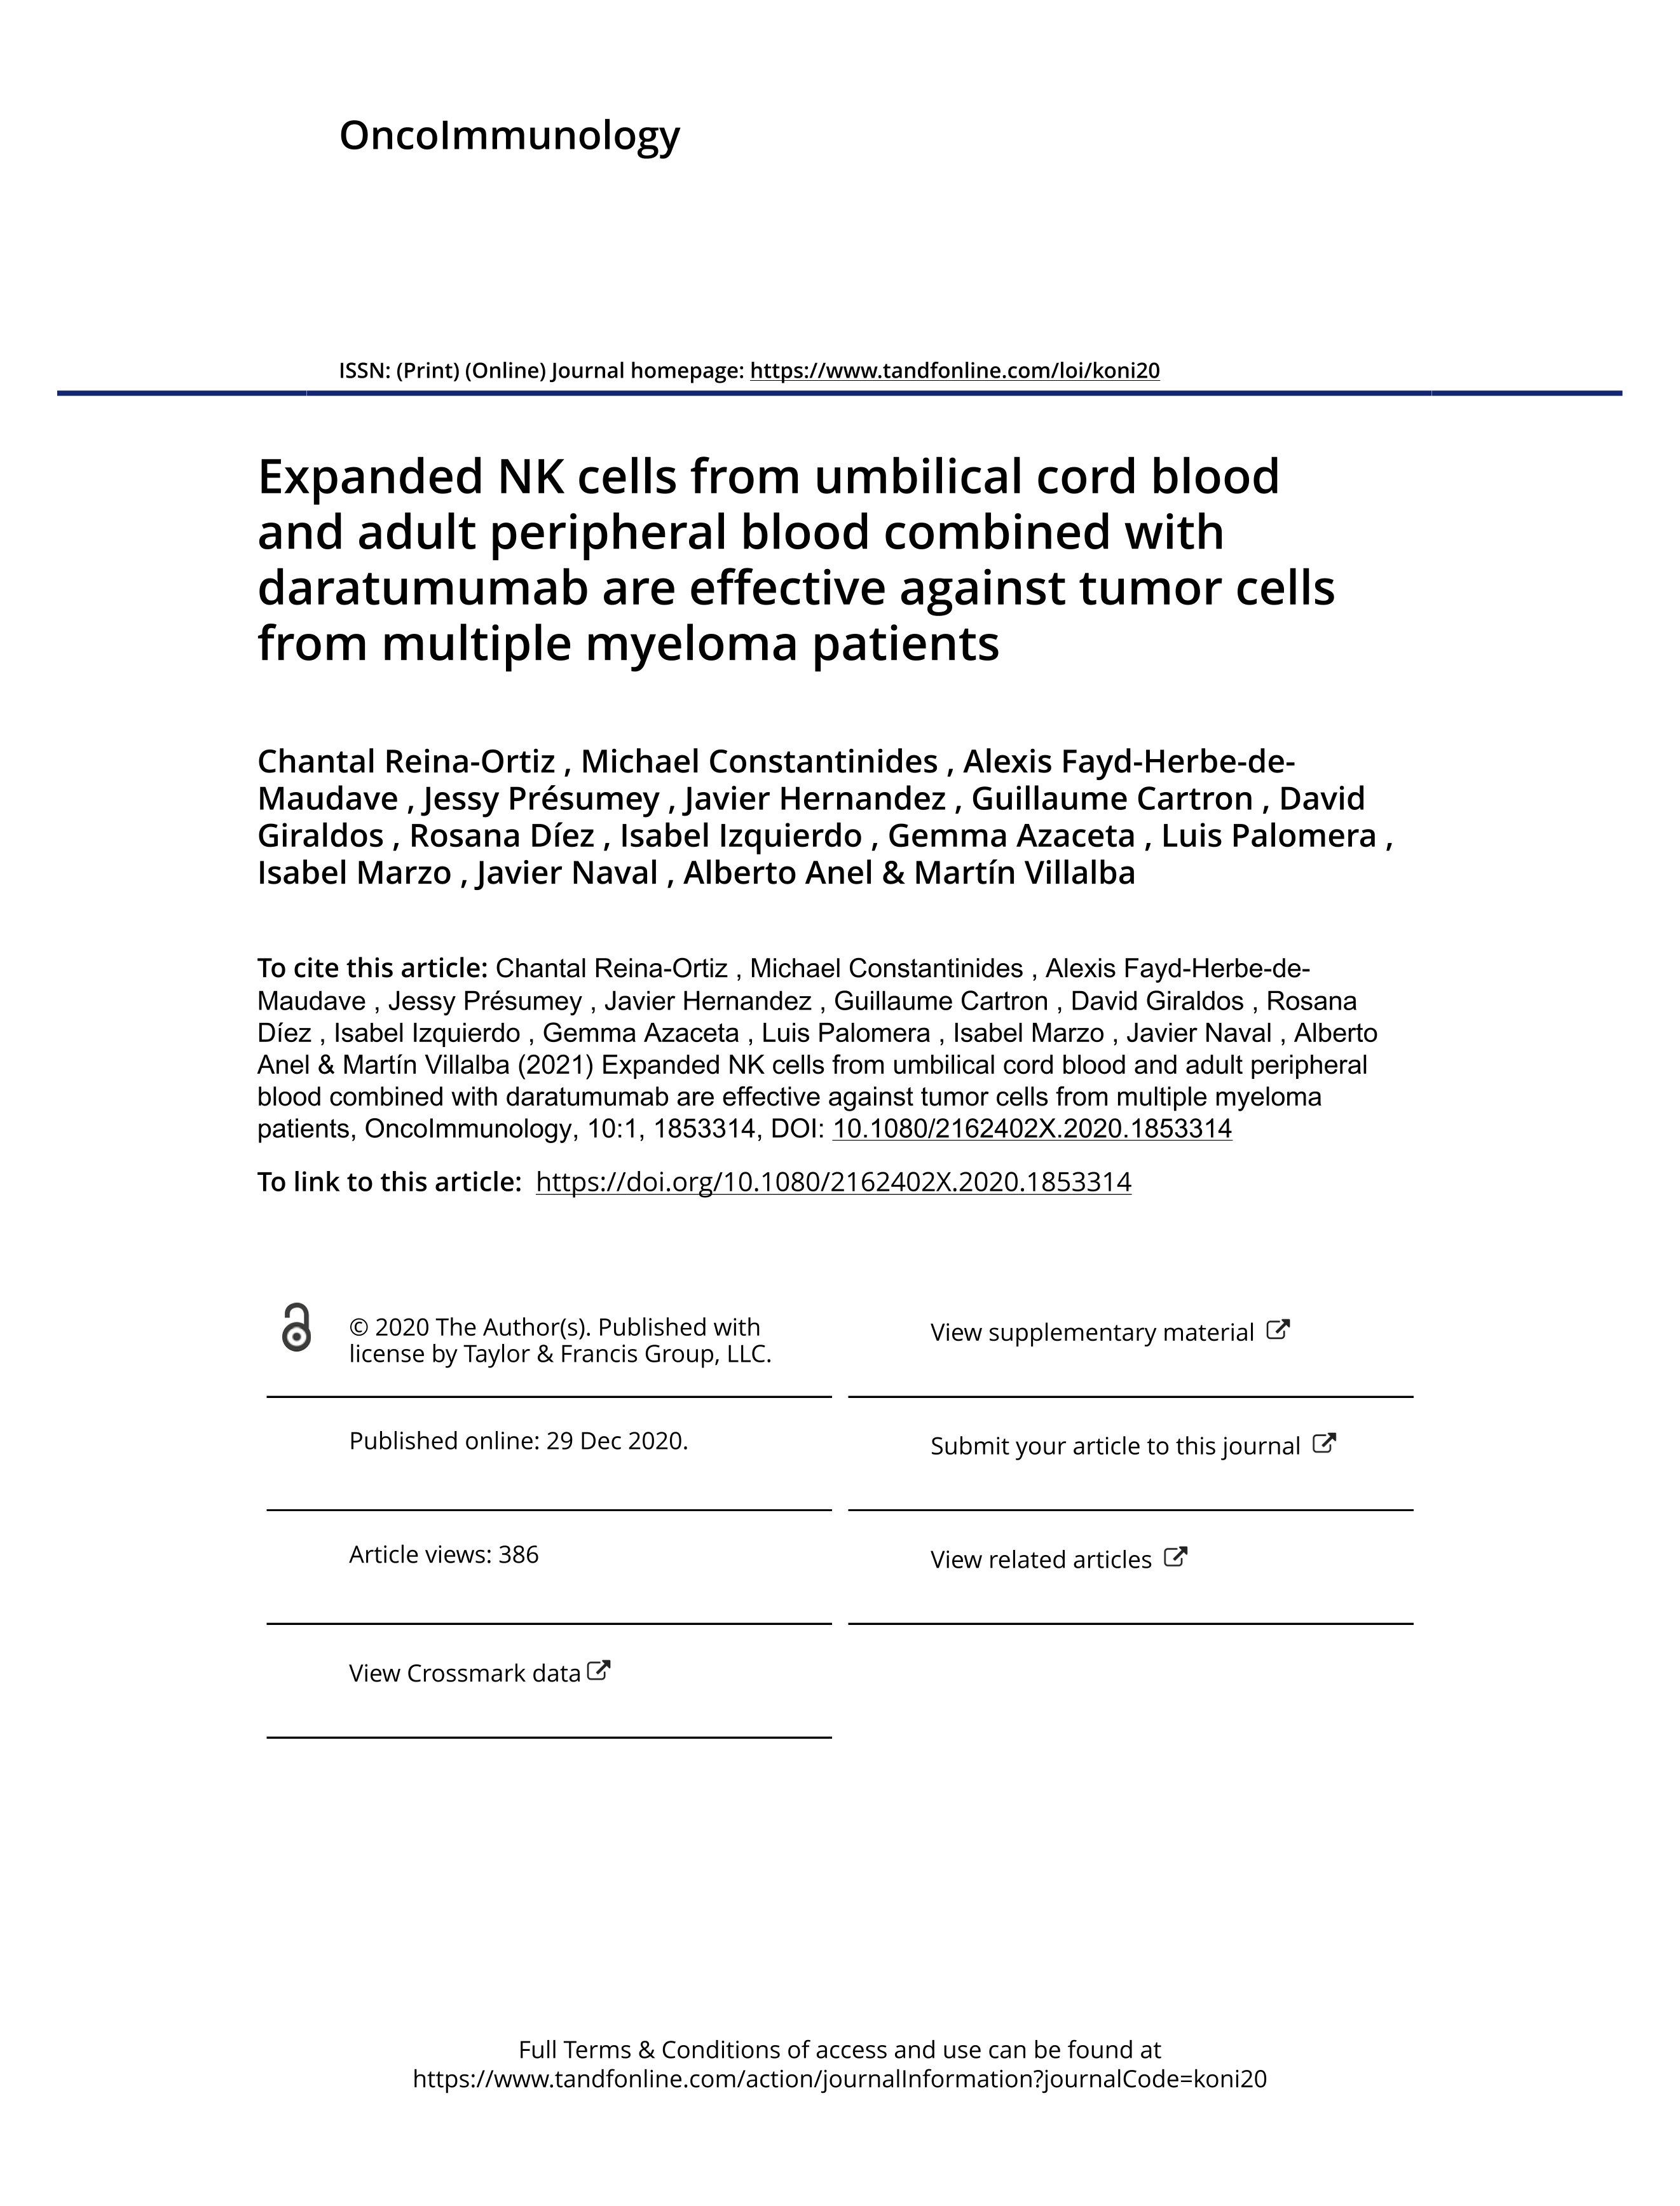 Expanded NK cells from umbilical cord blood and adult peripheral blood combined with daratumumab are effective against tumor cells from multiple myeloma patients